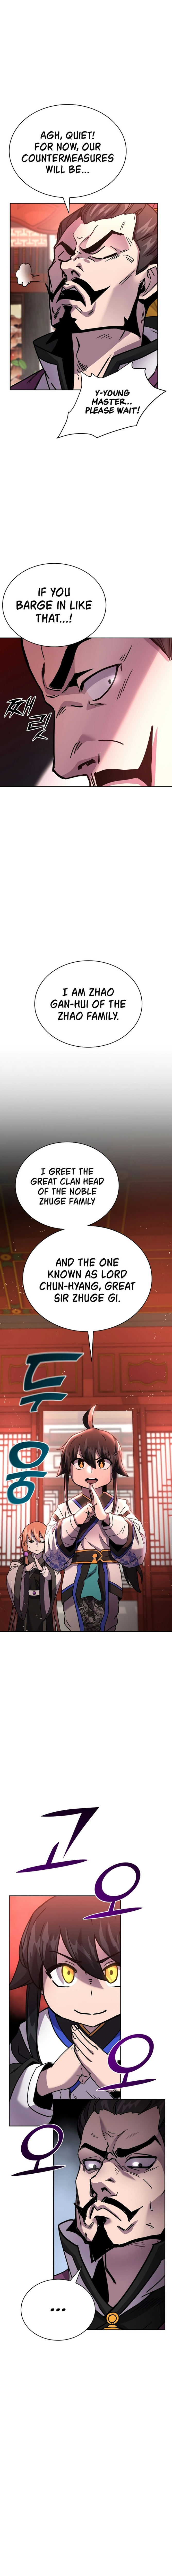 Martial Streamer - Chapter 8 Page 6